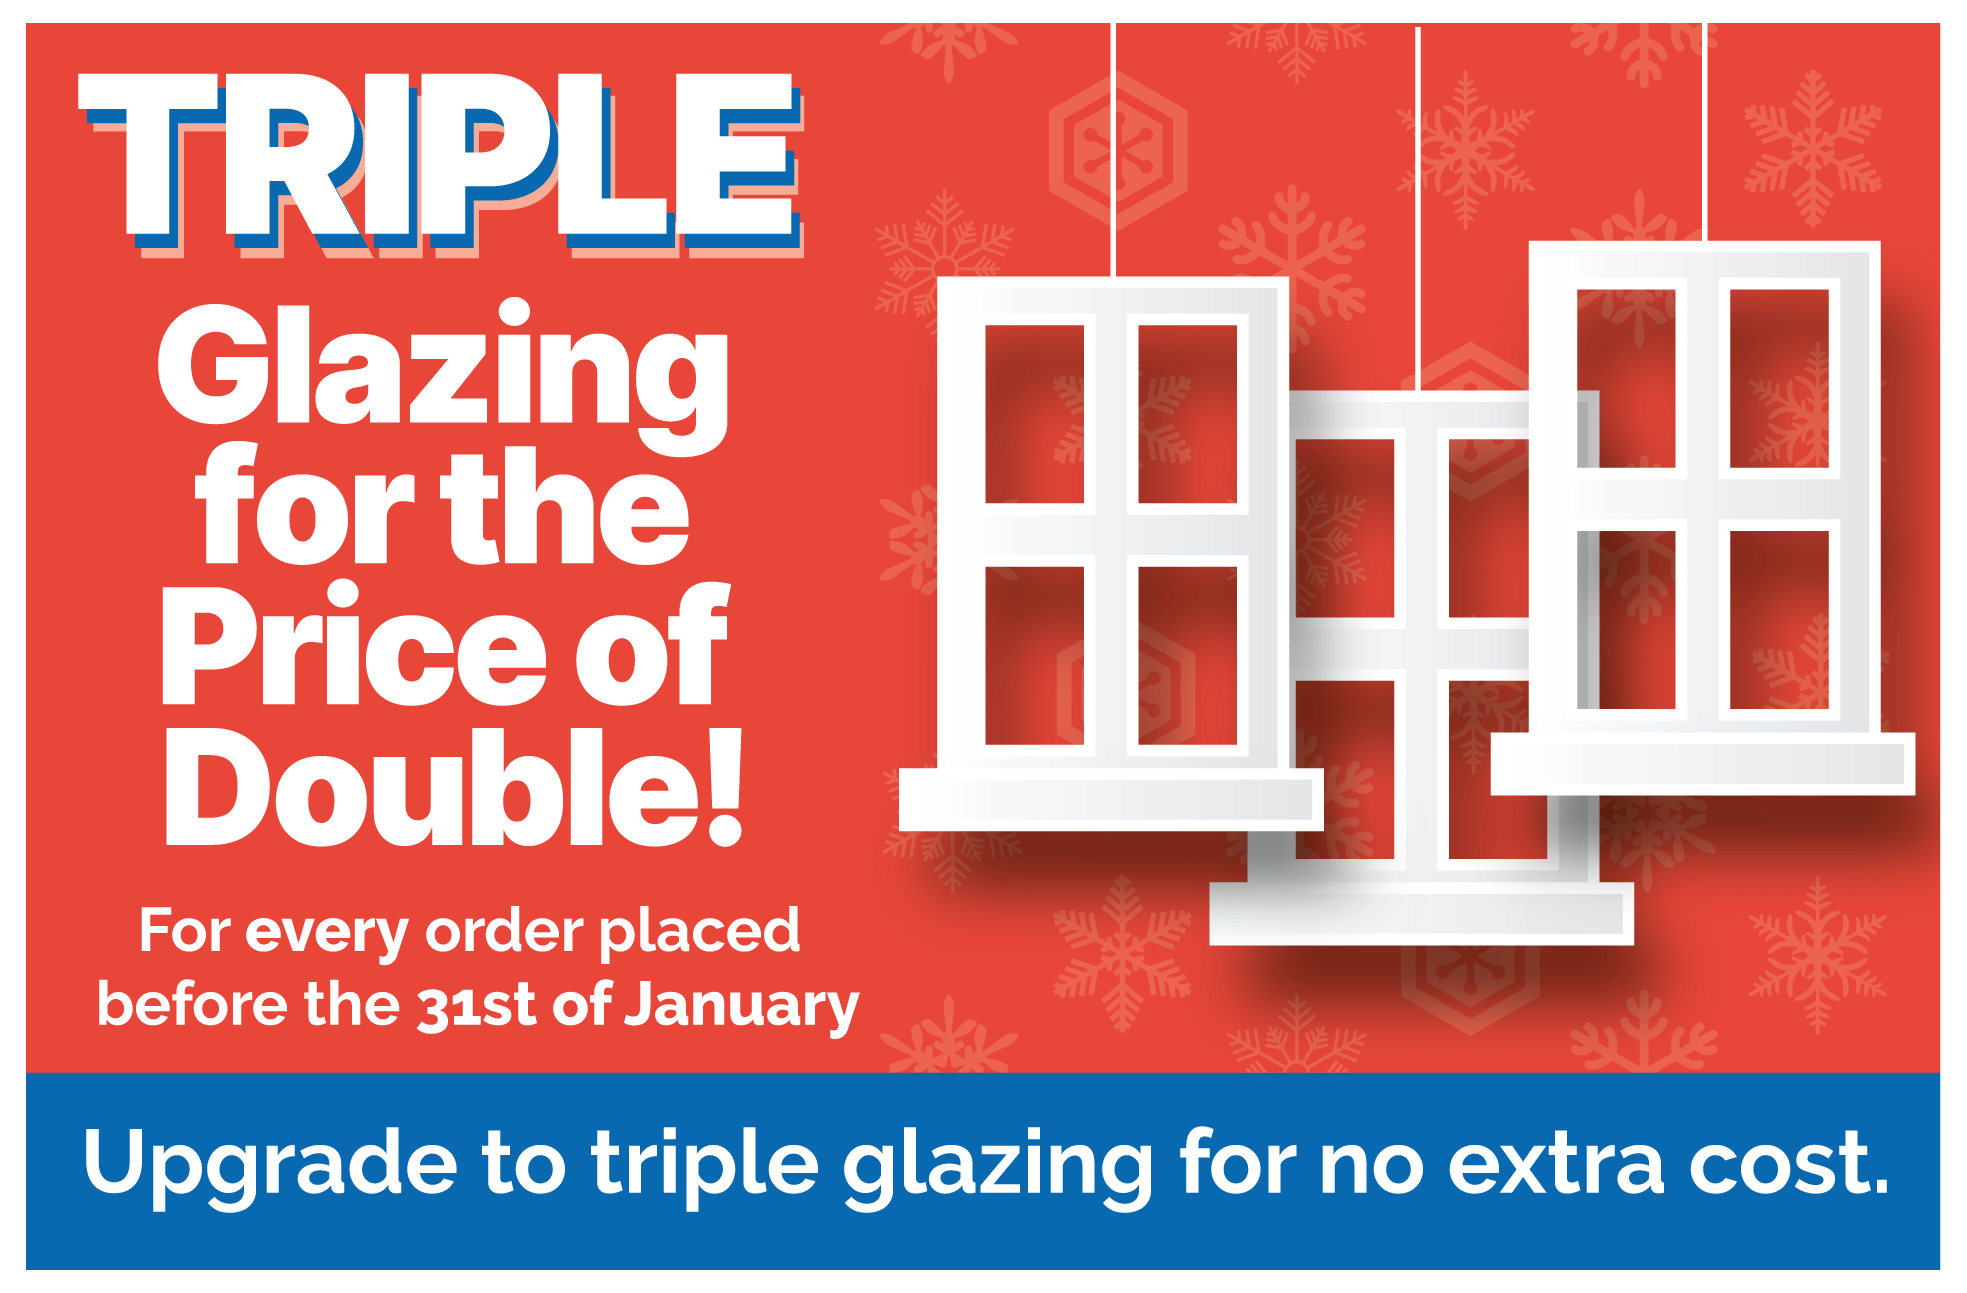 Triple glazing for the price of double